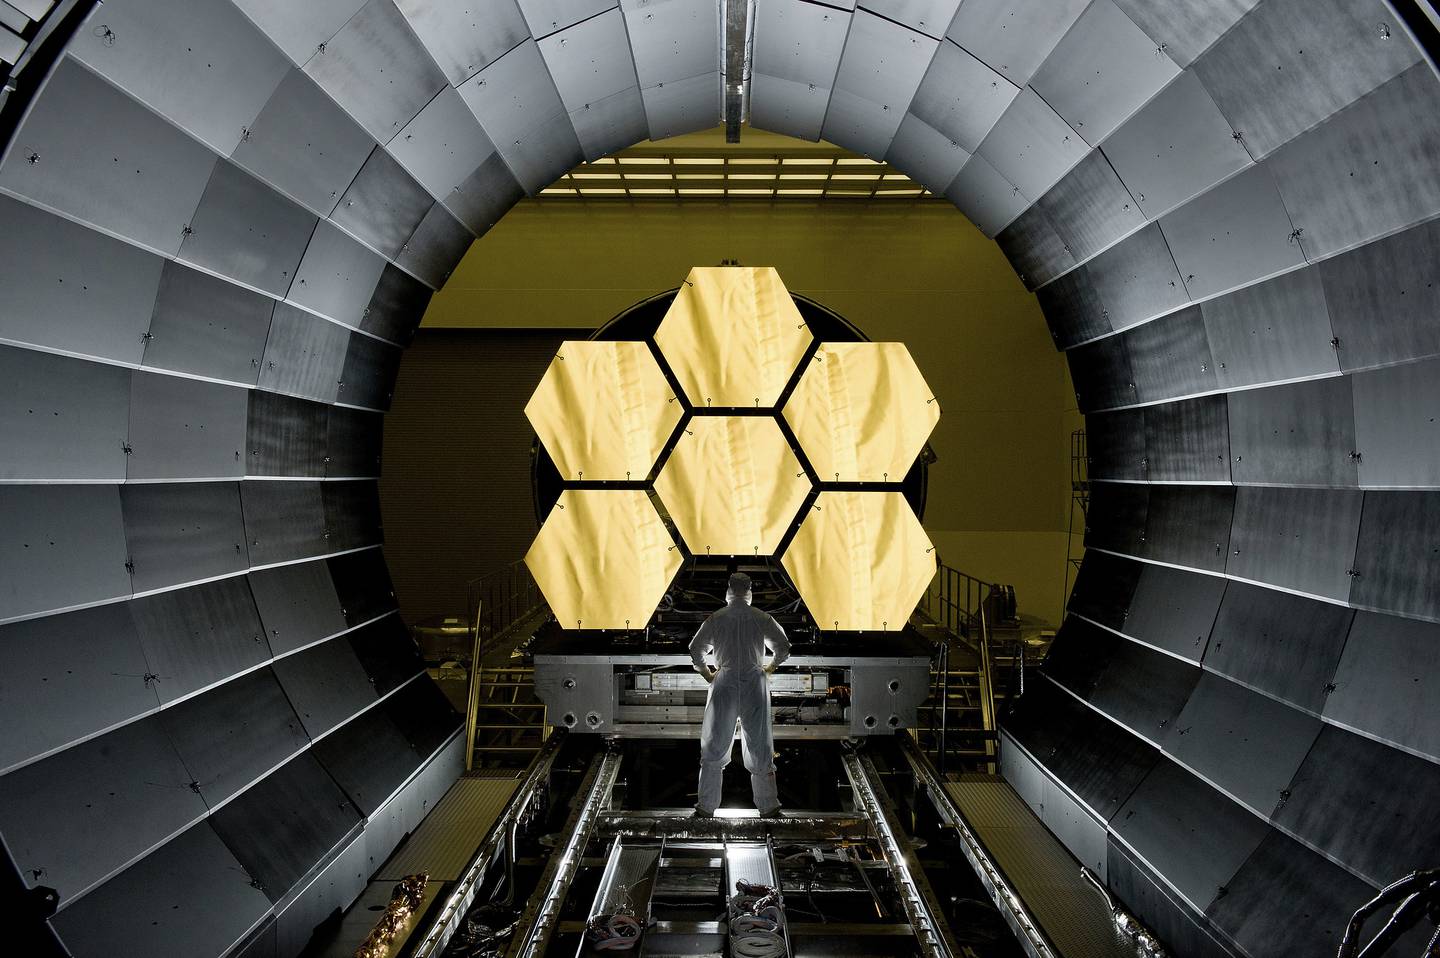 NASA engineer Ernie Wright looks on as the first six flight ready James Webb Space Telescope's primary mirror segments being prepped to begin final cryogenic testing at NASA's Marshall Space Flight Center.